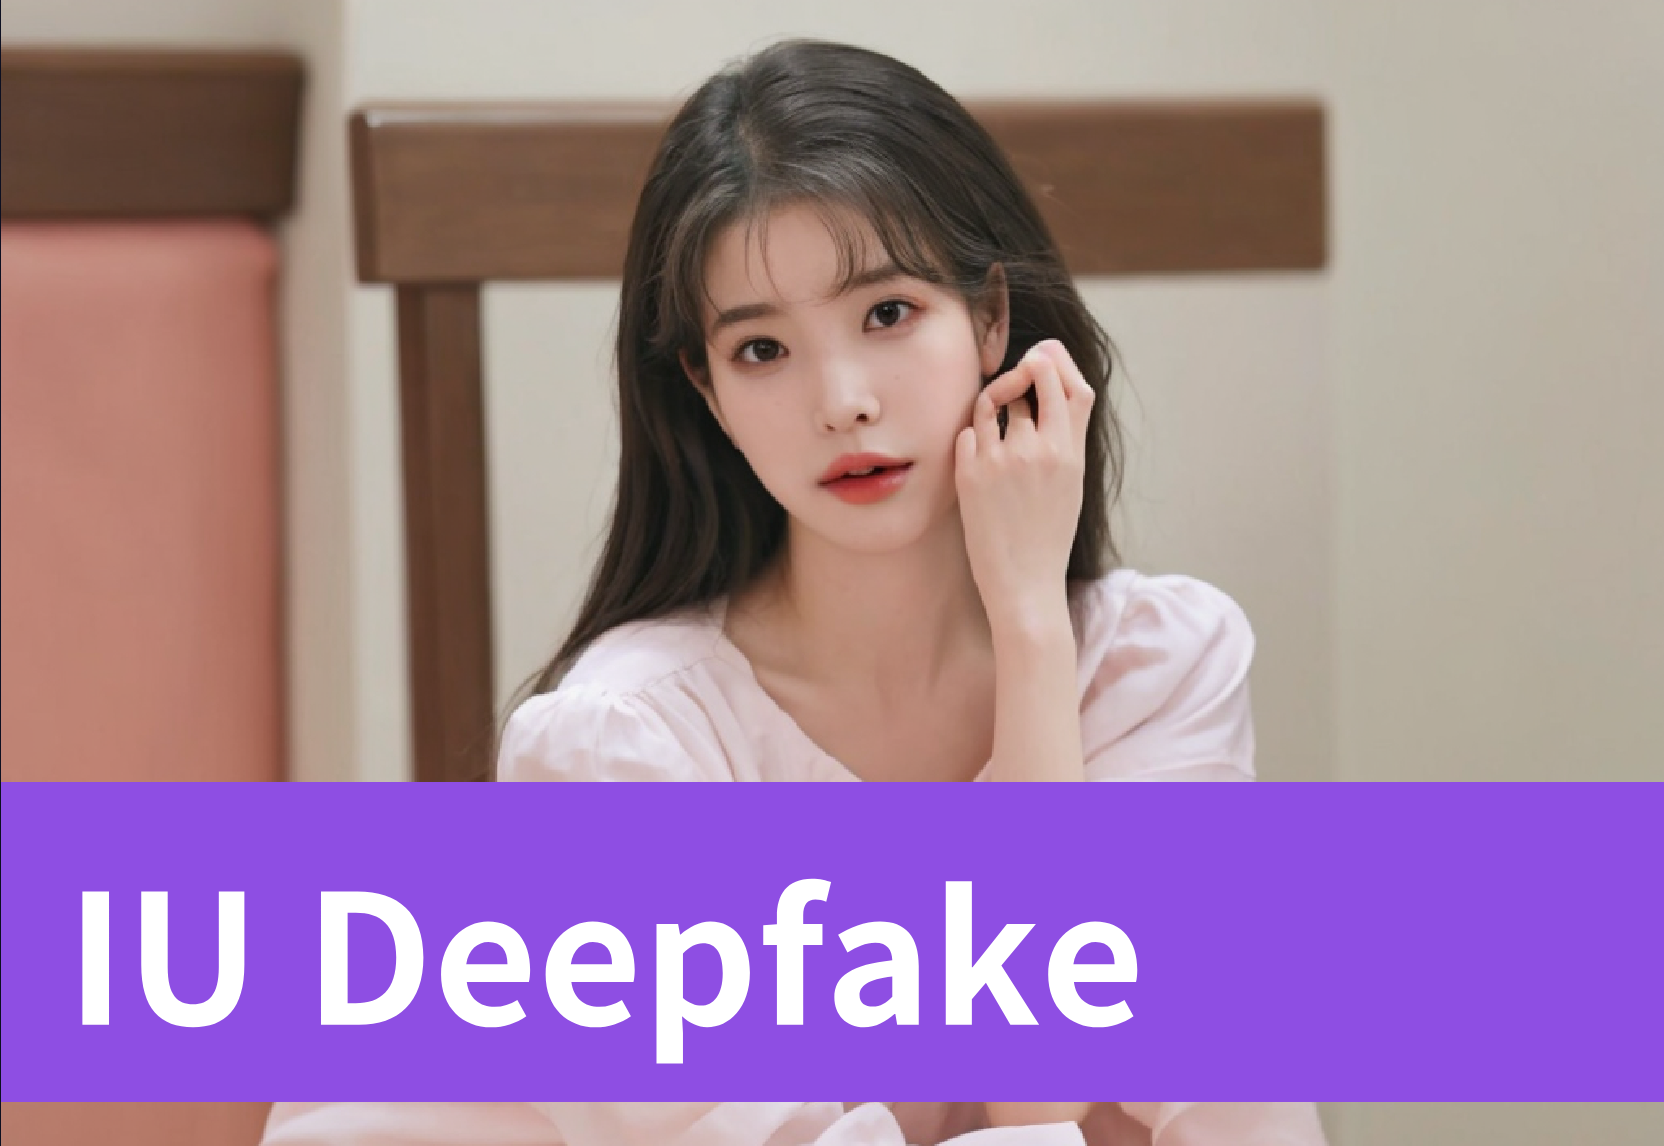 Becoming Proficient in the Craft of IU Deepfake Production